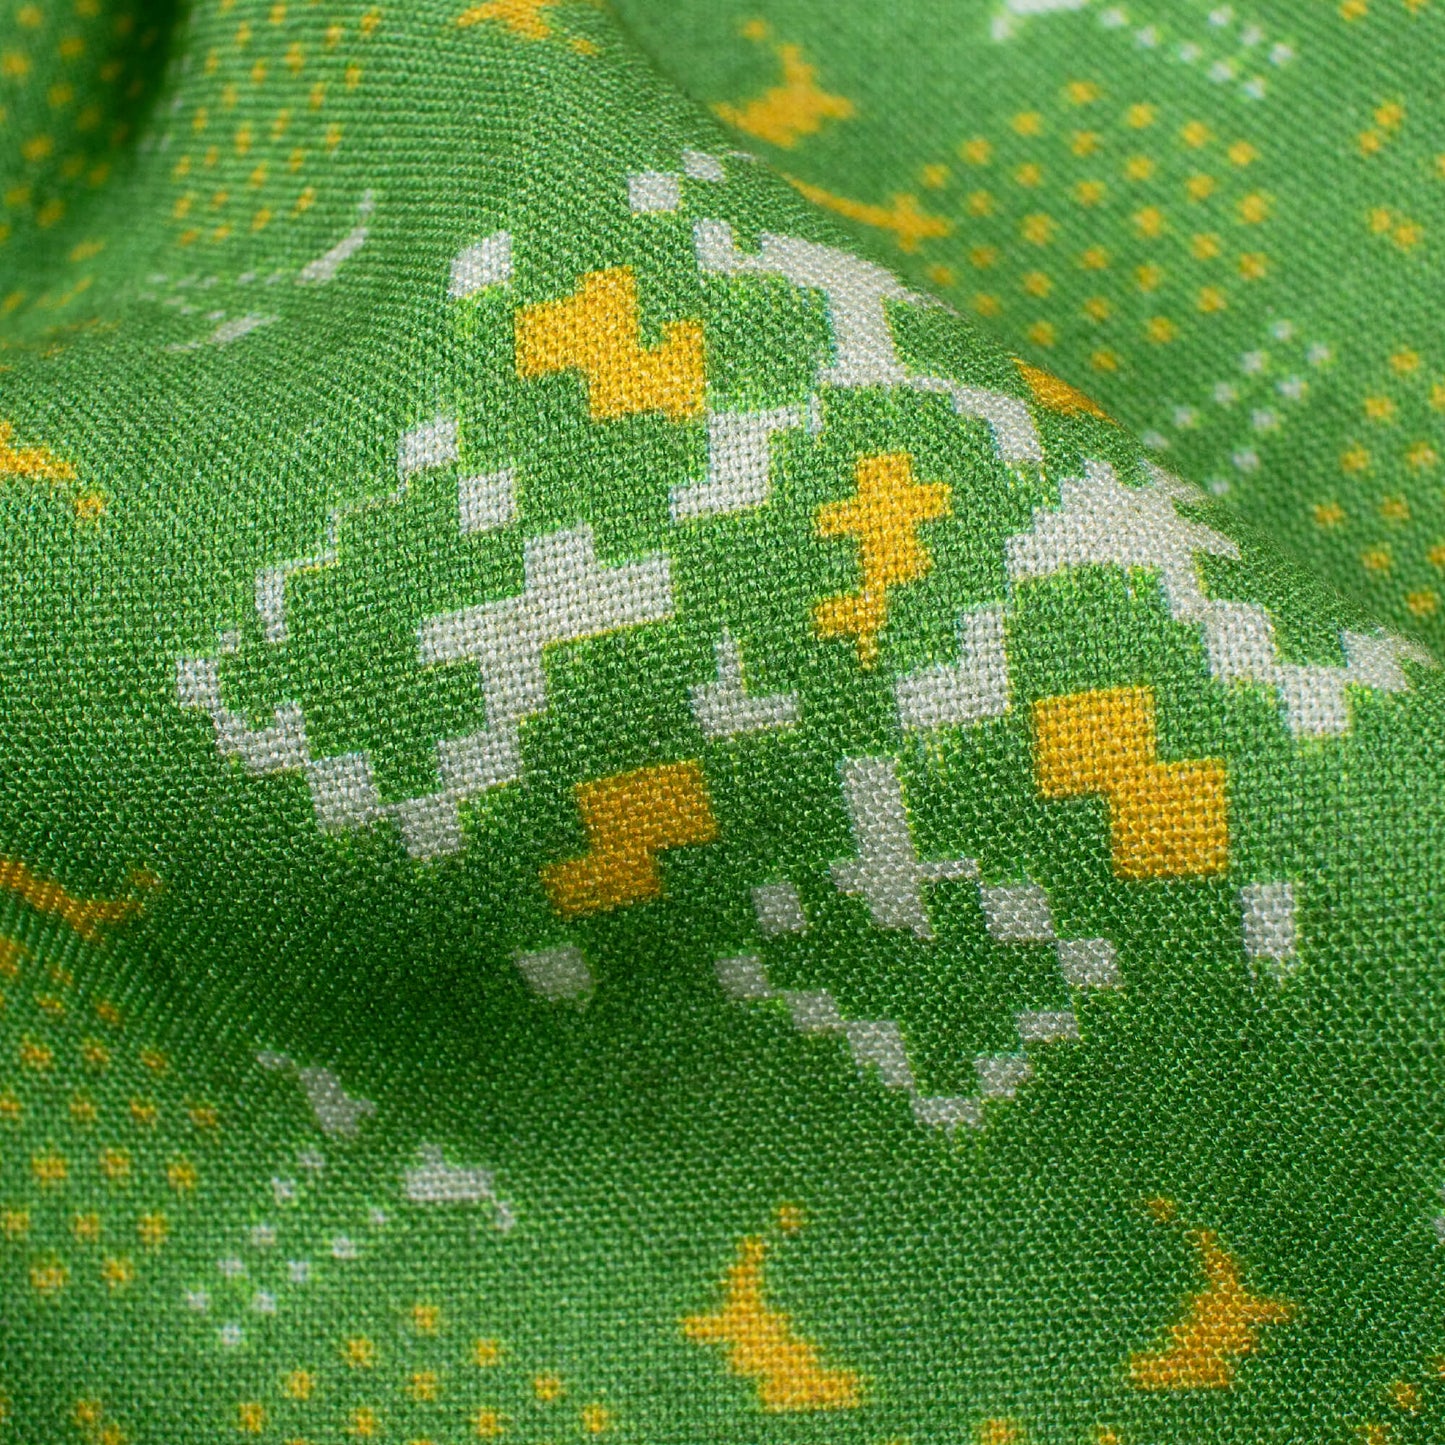 Parrot Green And Yellow Patola Pattern Digital Print Viscose Rayon Fabric (Width 58 Inches)